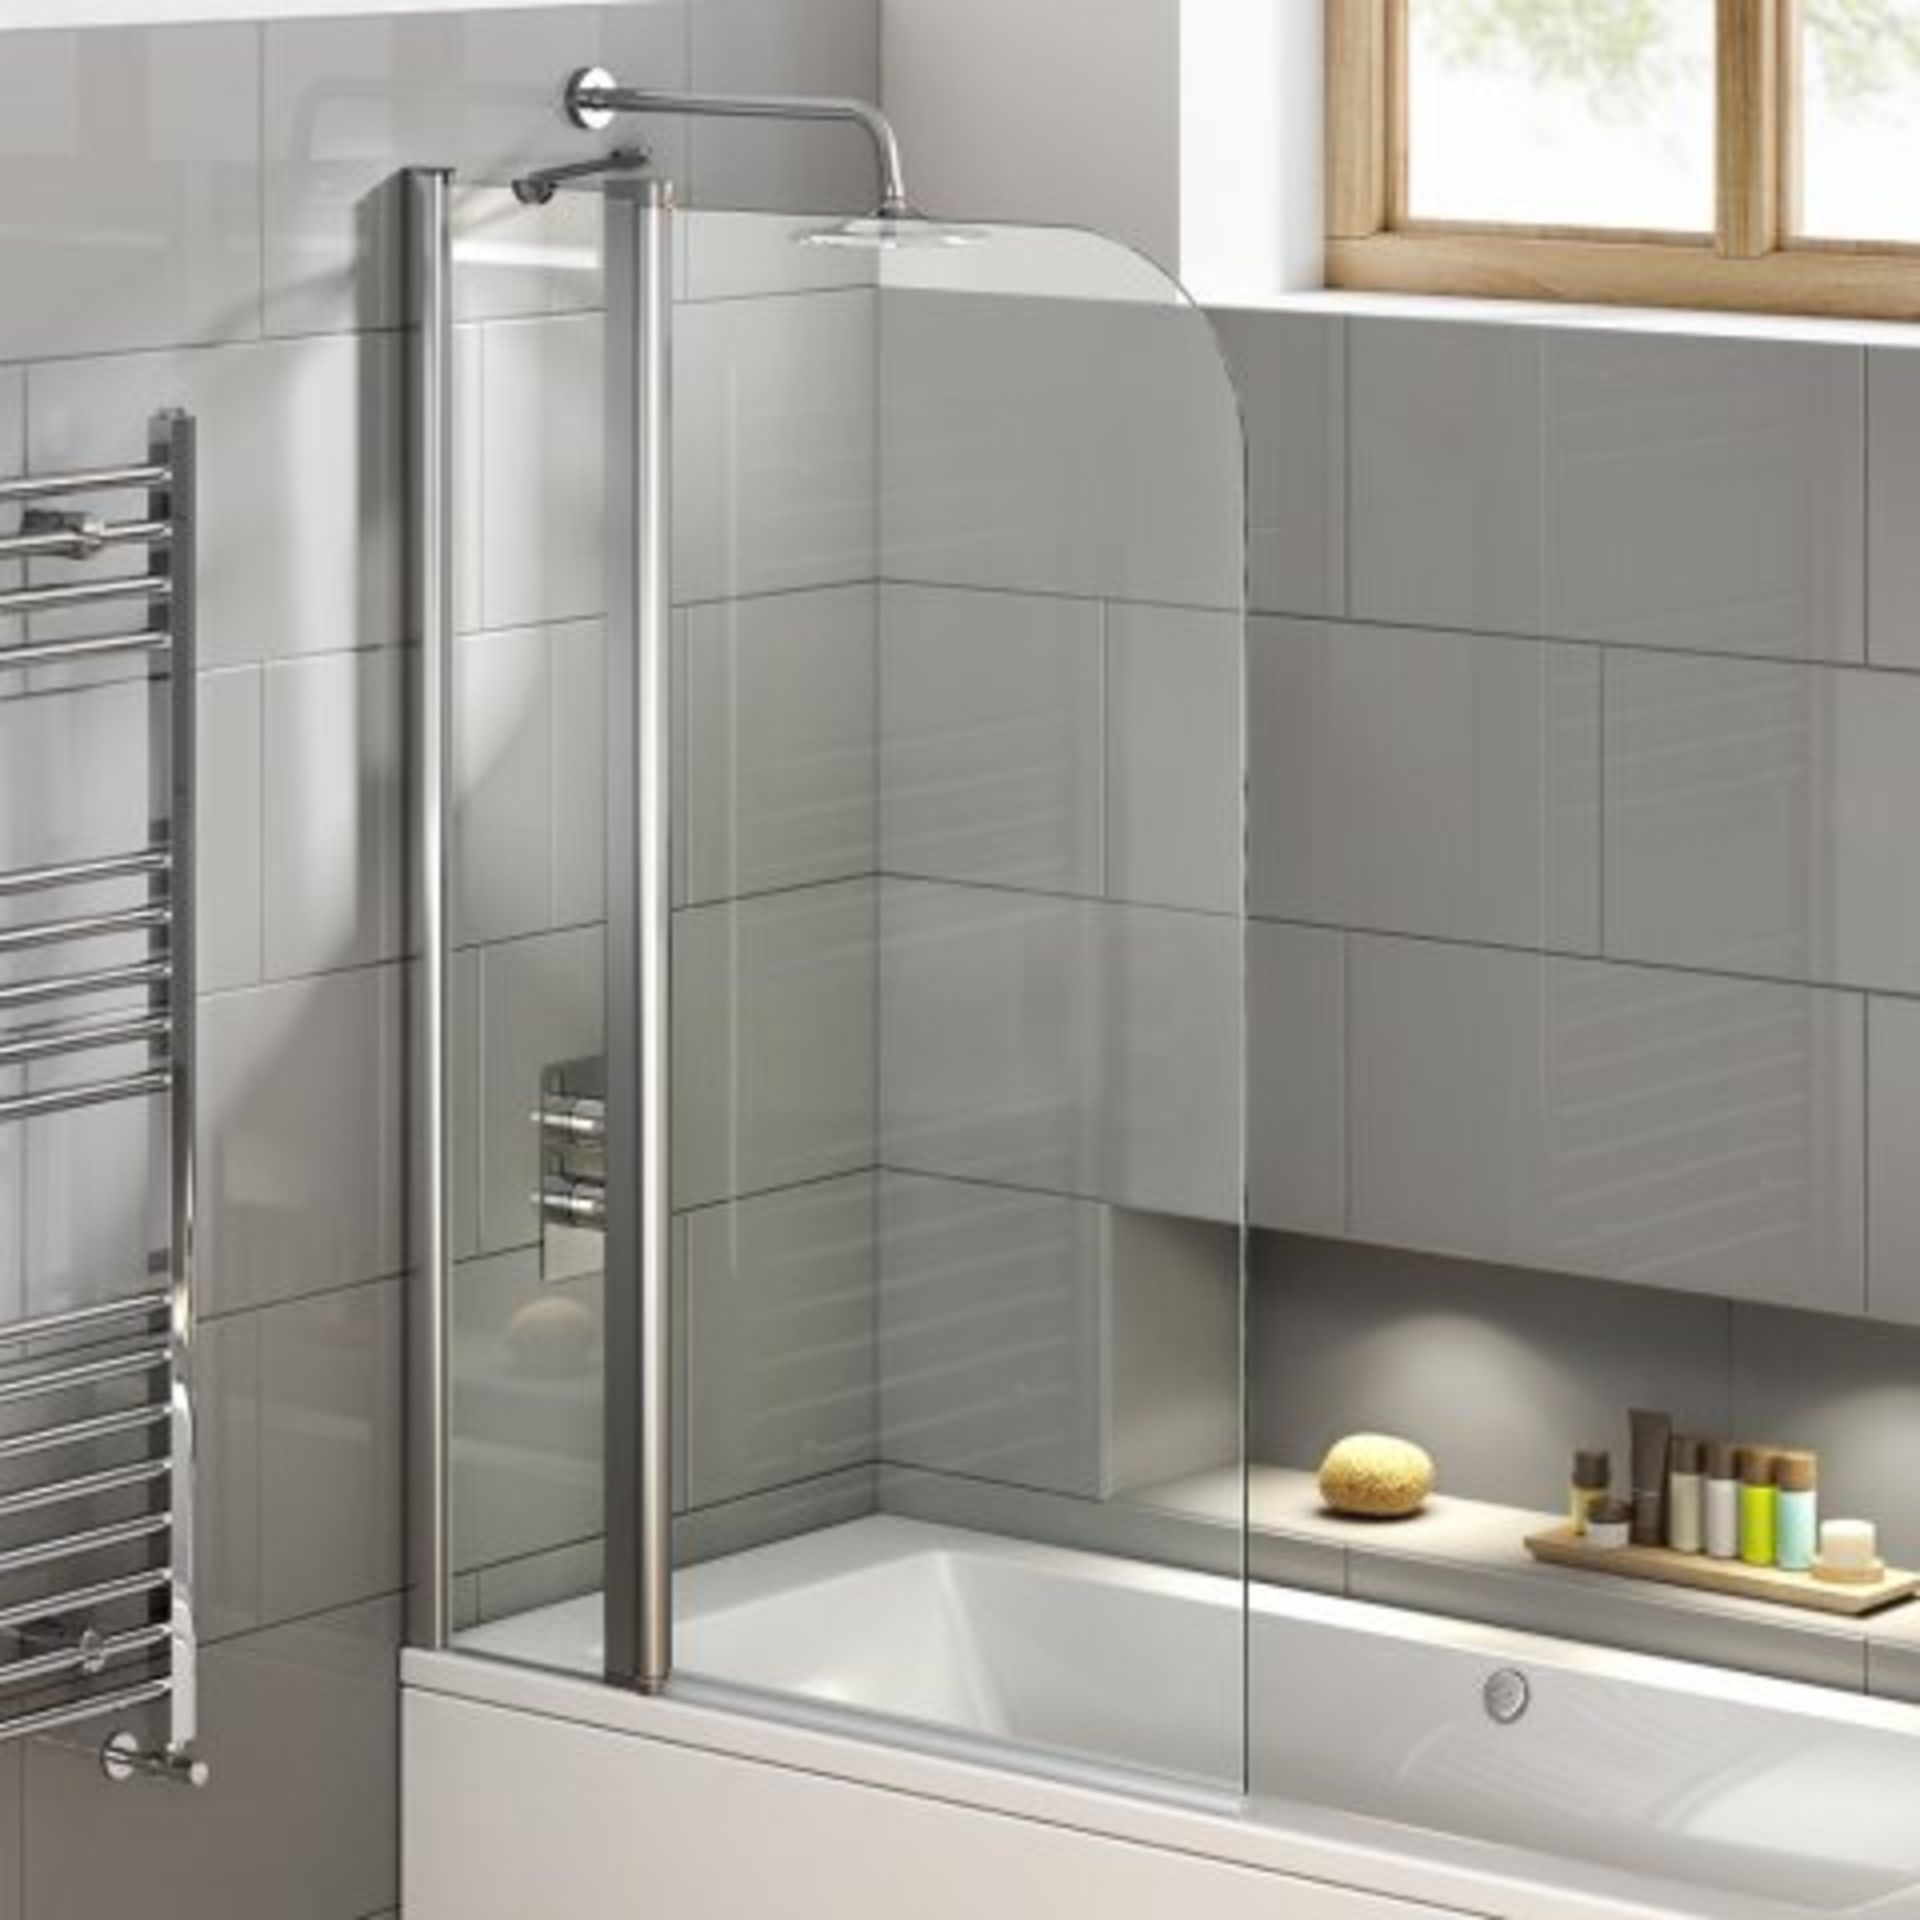 (Z66) 1000mm - 6mm - EasyClean Straight Bath Screen. RRP £224.99. The clue is in the name: Easy - Image 2 of 5